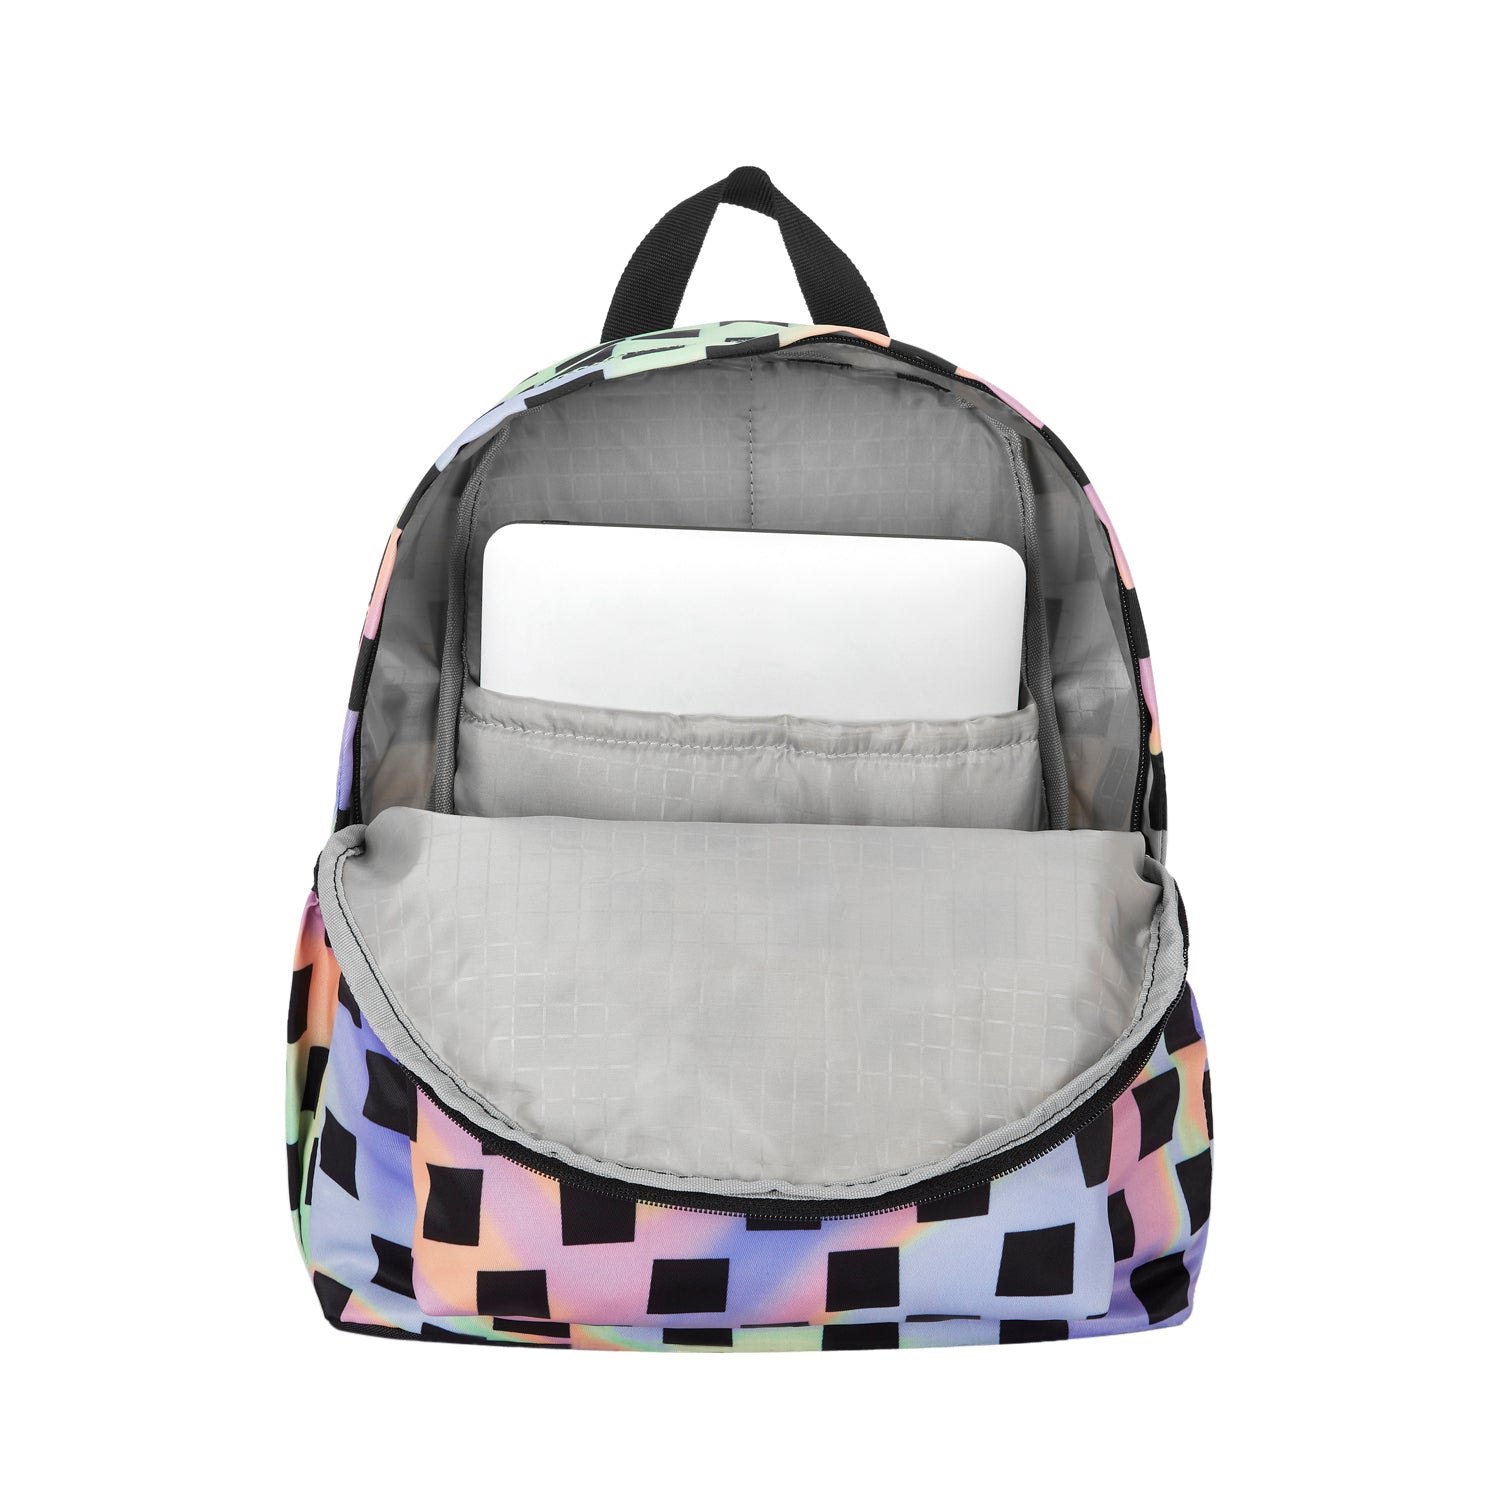 Genie Iridescence 13.5L Multicolor Small Backpack Made With Premium Fabric